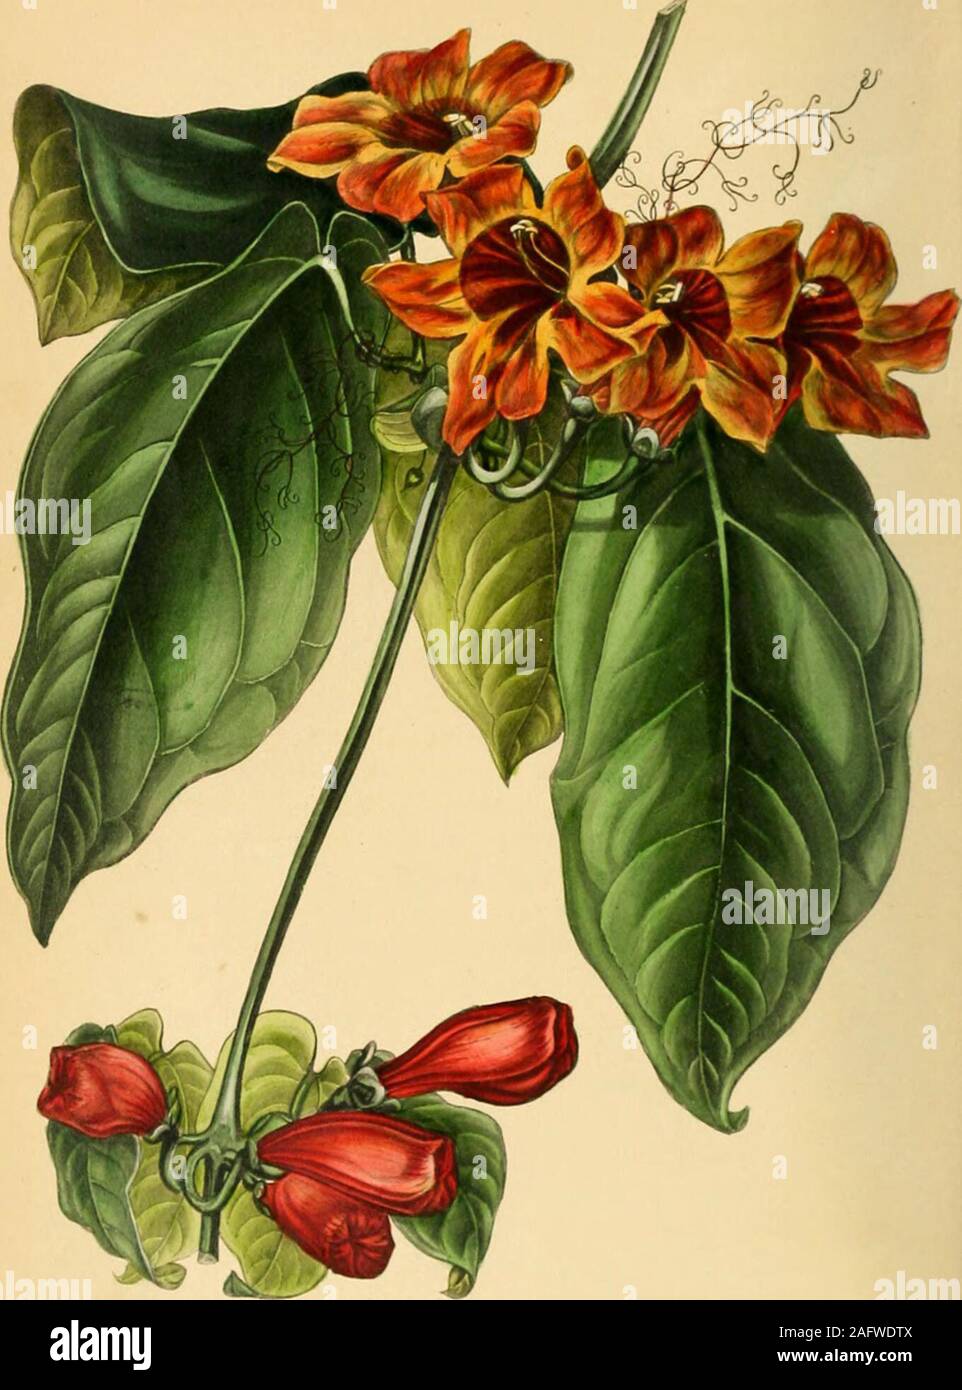 . Paxton's Magazine of Botany and Register of Flowering Plants. I-rrtnft/rr ? rrr. rrA t-r-Ui ^^^ 245 BIGNONIA CAPREOLATA. (tendrilled tkumpet-flower.) class. order. DIDYNAMIA. ANGIOSPERMIA. natural order.BIGNONIACEjE. Genehic Character.— Calyx campanulatCj five-toothed, r.Trely entire. Corolla with a short tube, acampanulate throat, and a Hve-lobed, bilabiate limb. Stamens four, didynamous, with the rudimentof a fiftli. Lobet of anthers divaricate. Stigma bilamellate. Capsule silique-formed, two-celled ;liaving the dissepiruent parallel with tiie valves; seeds disposed in two rows, imbricate, Stock Photo